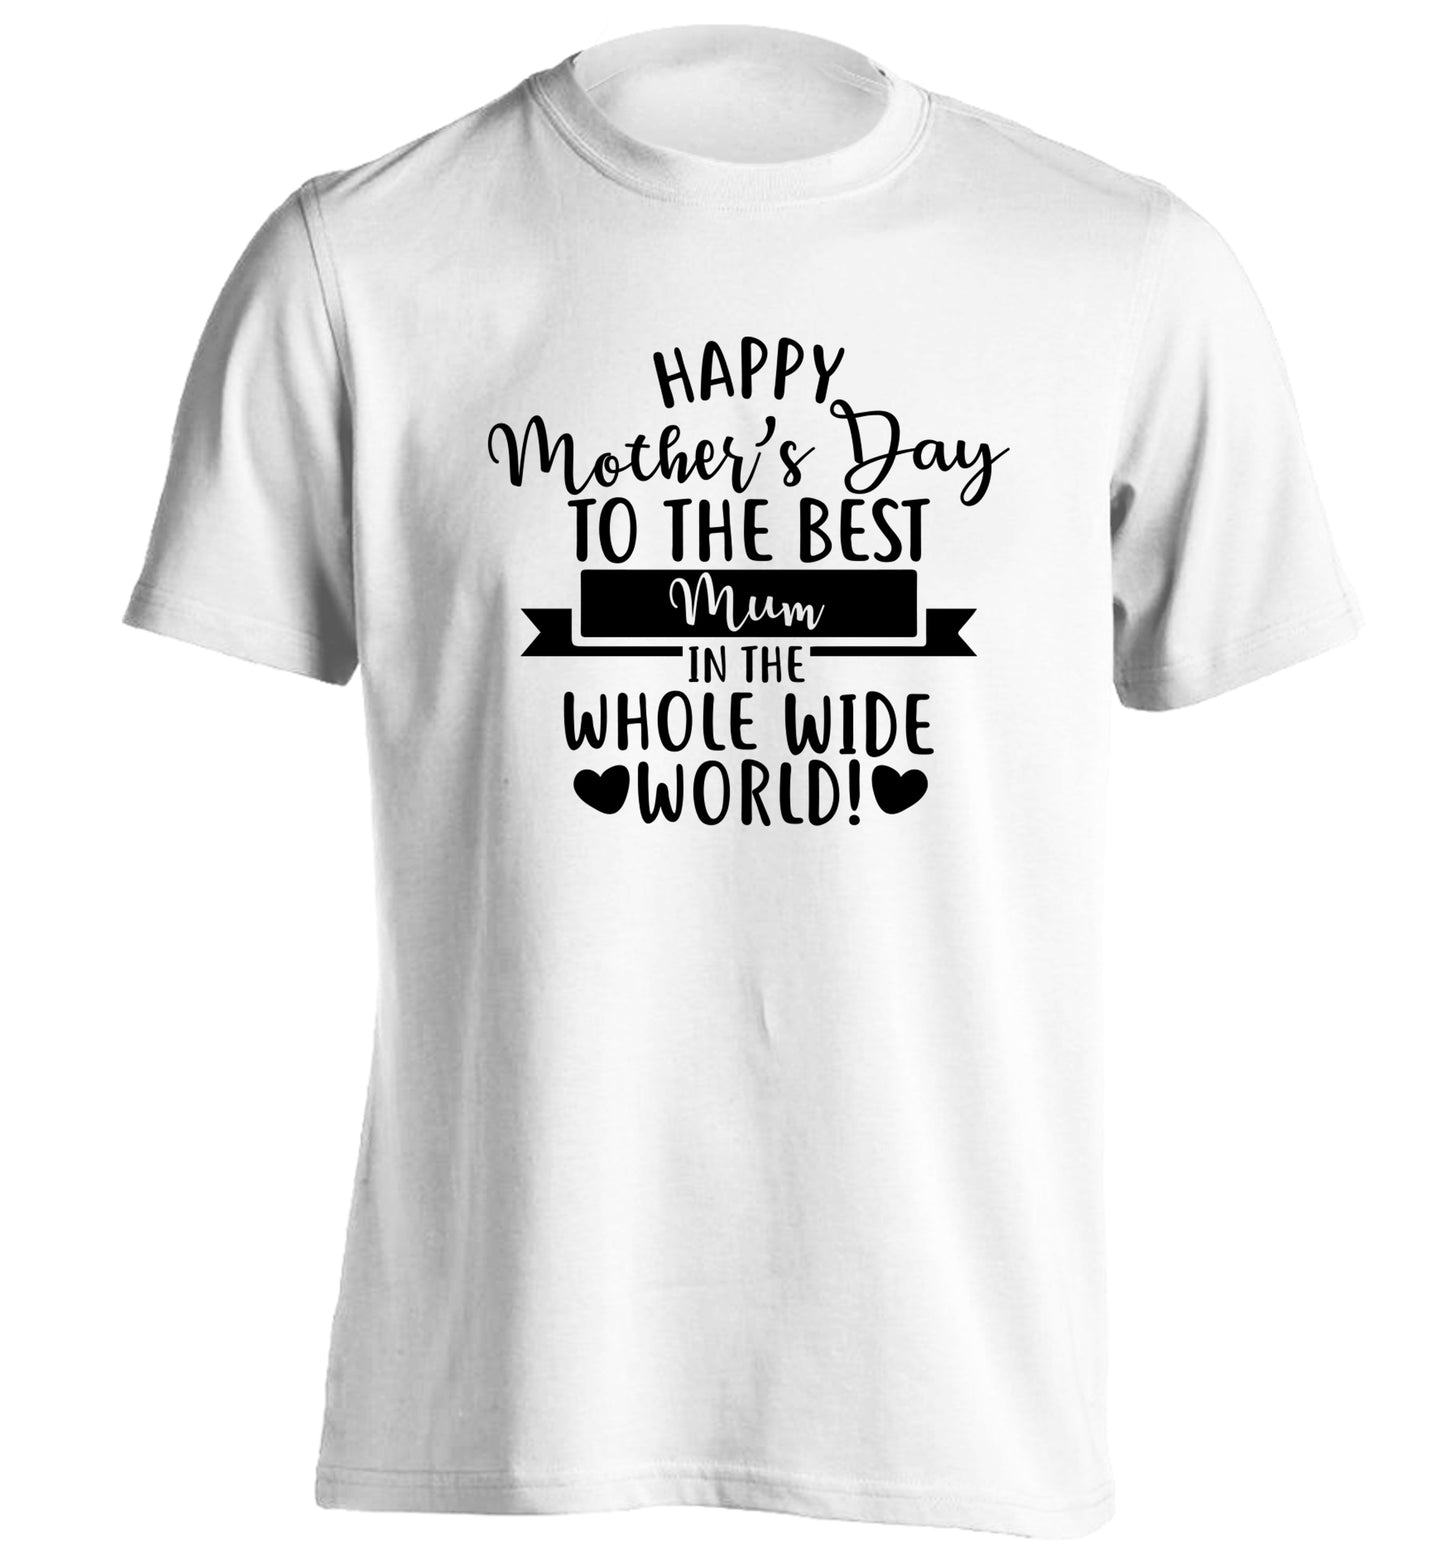 Happy Mother's Day to the best mum in the whole wide world! adults unisex white Tshirt 2XL